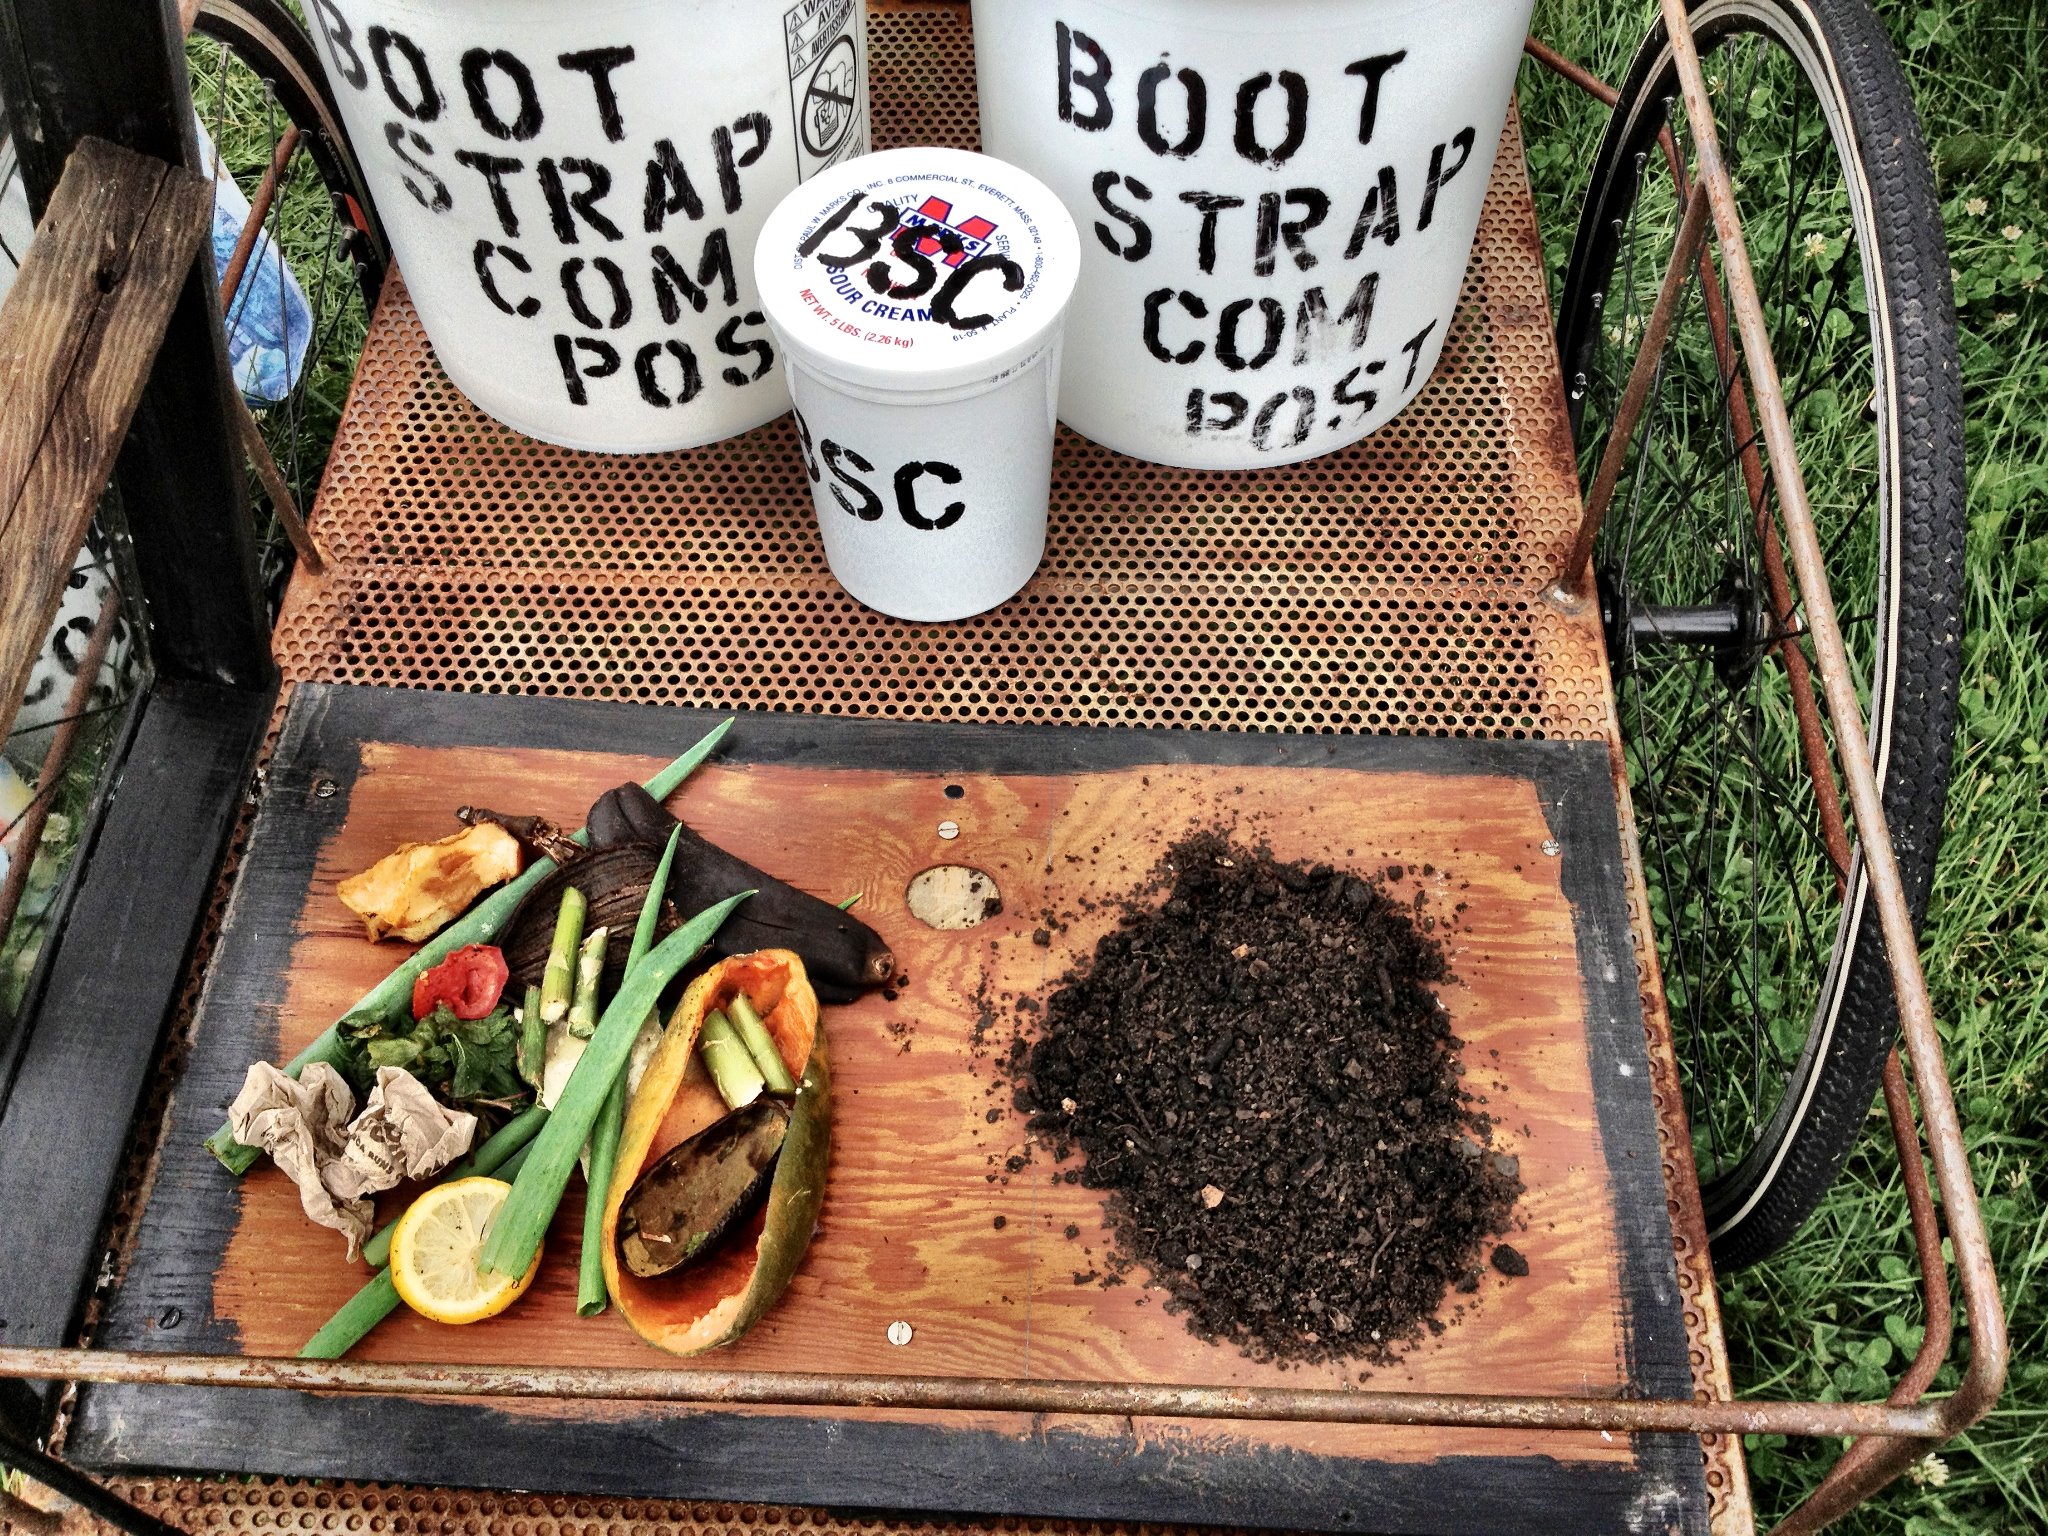 bootstrap-compost-gallons-compost